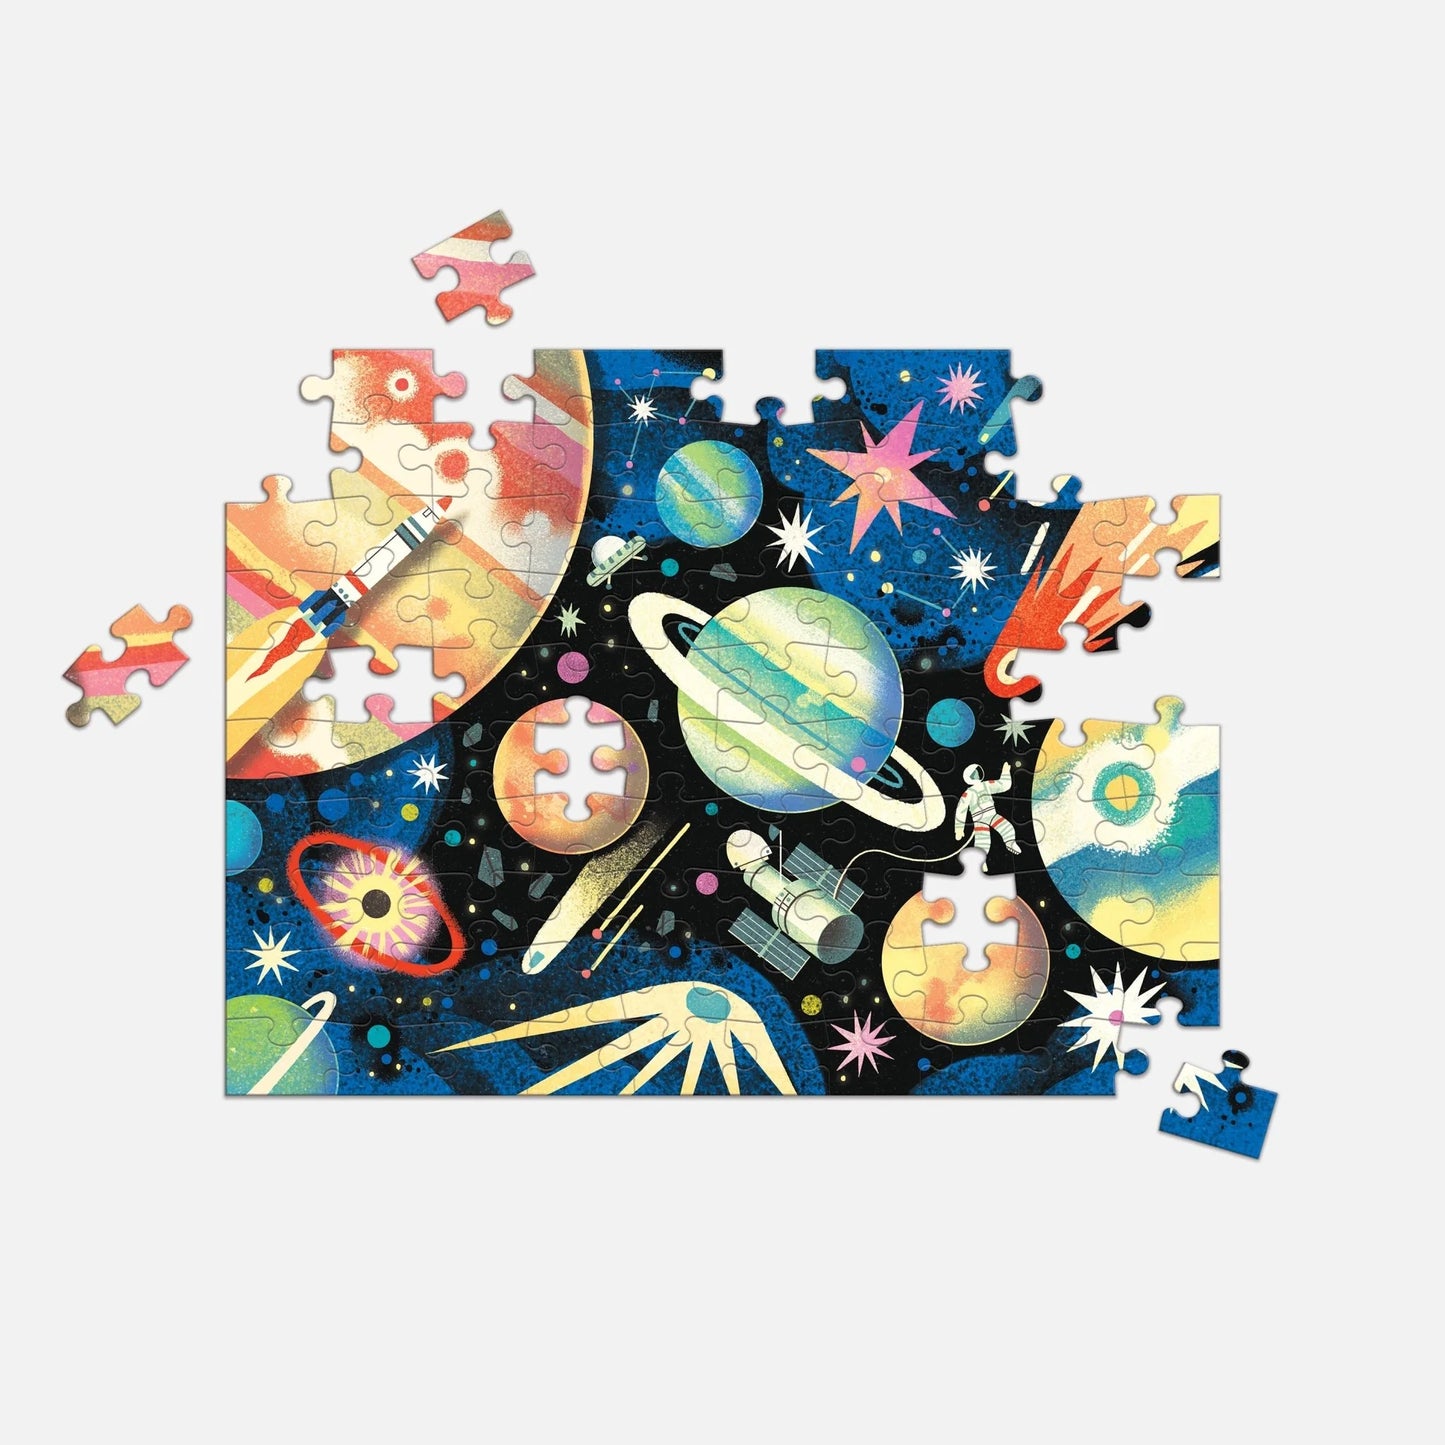 Space Mission Double Sided Puzzle 100pce